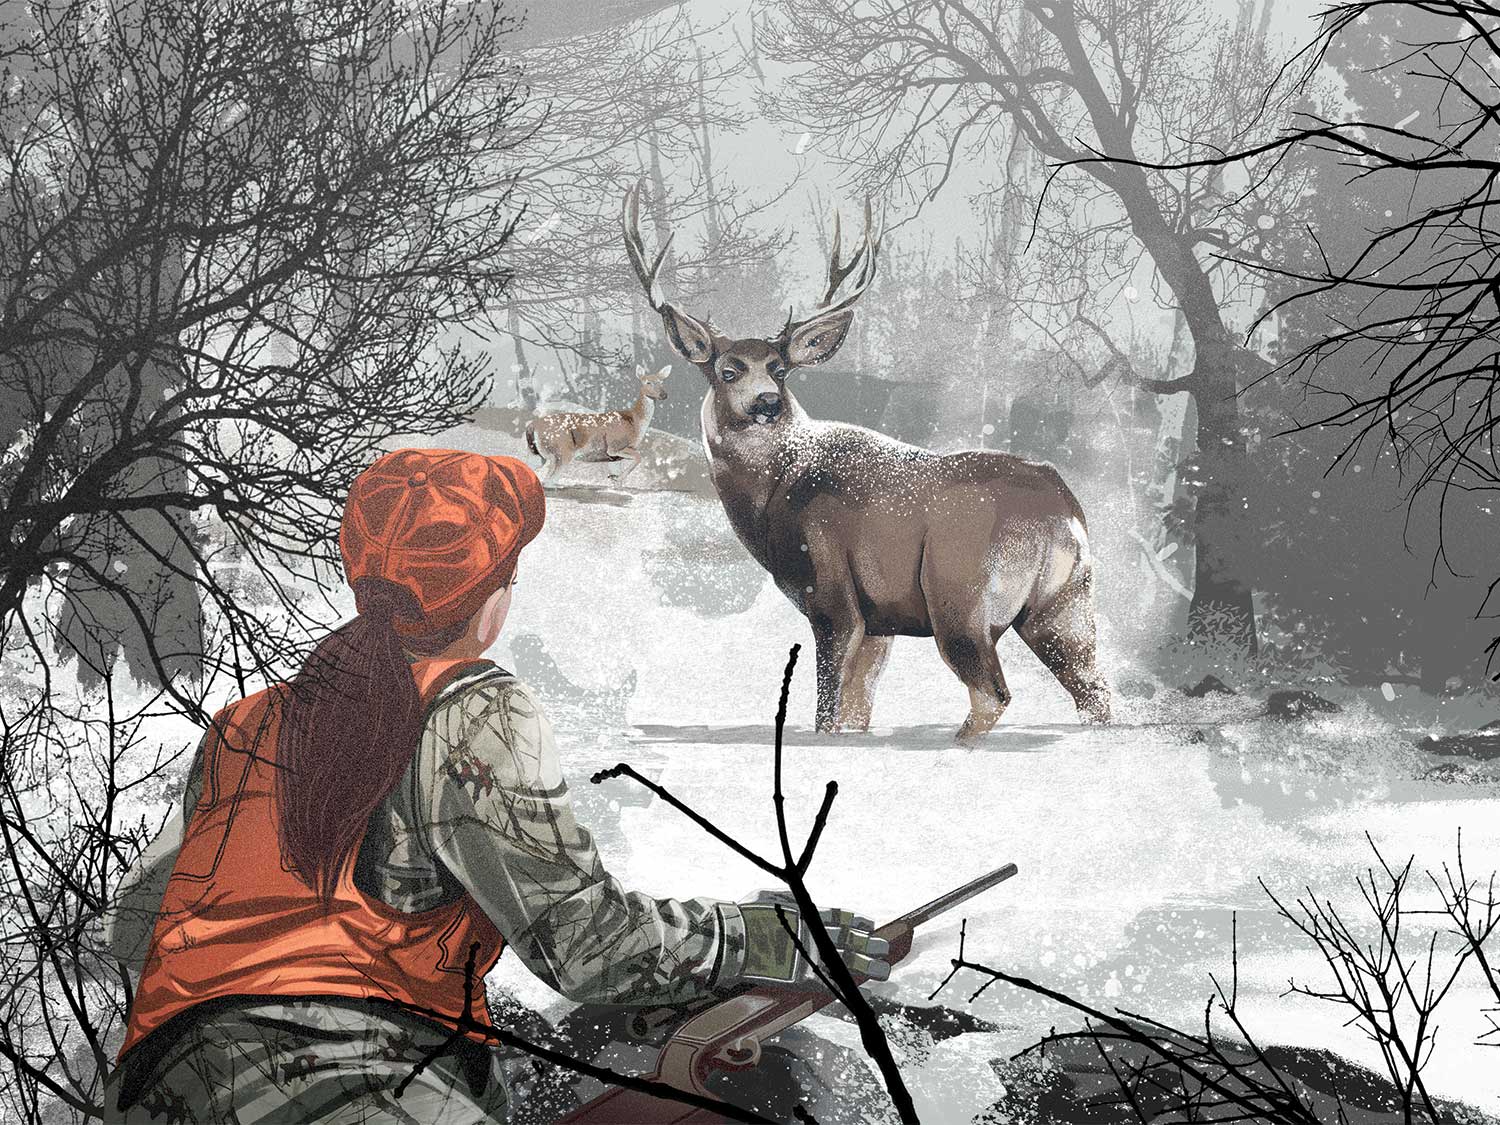 Illustration of a woman hunting deer in the snow.